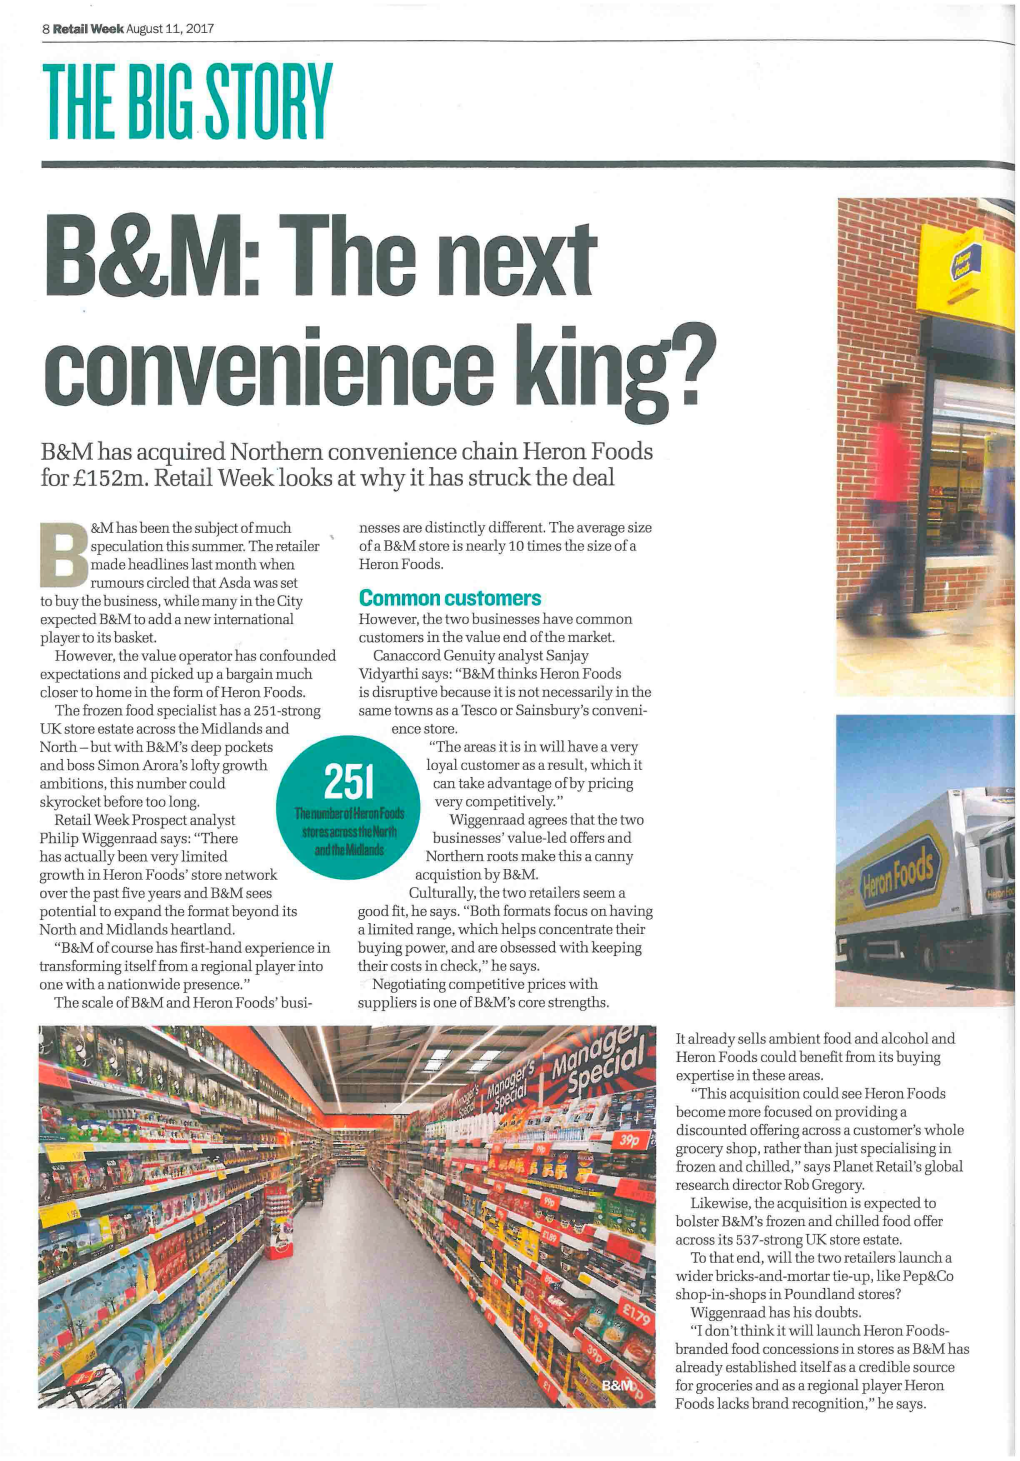 THE BIG STORY B&M: the Next Convenience King?